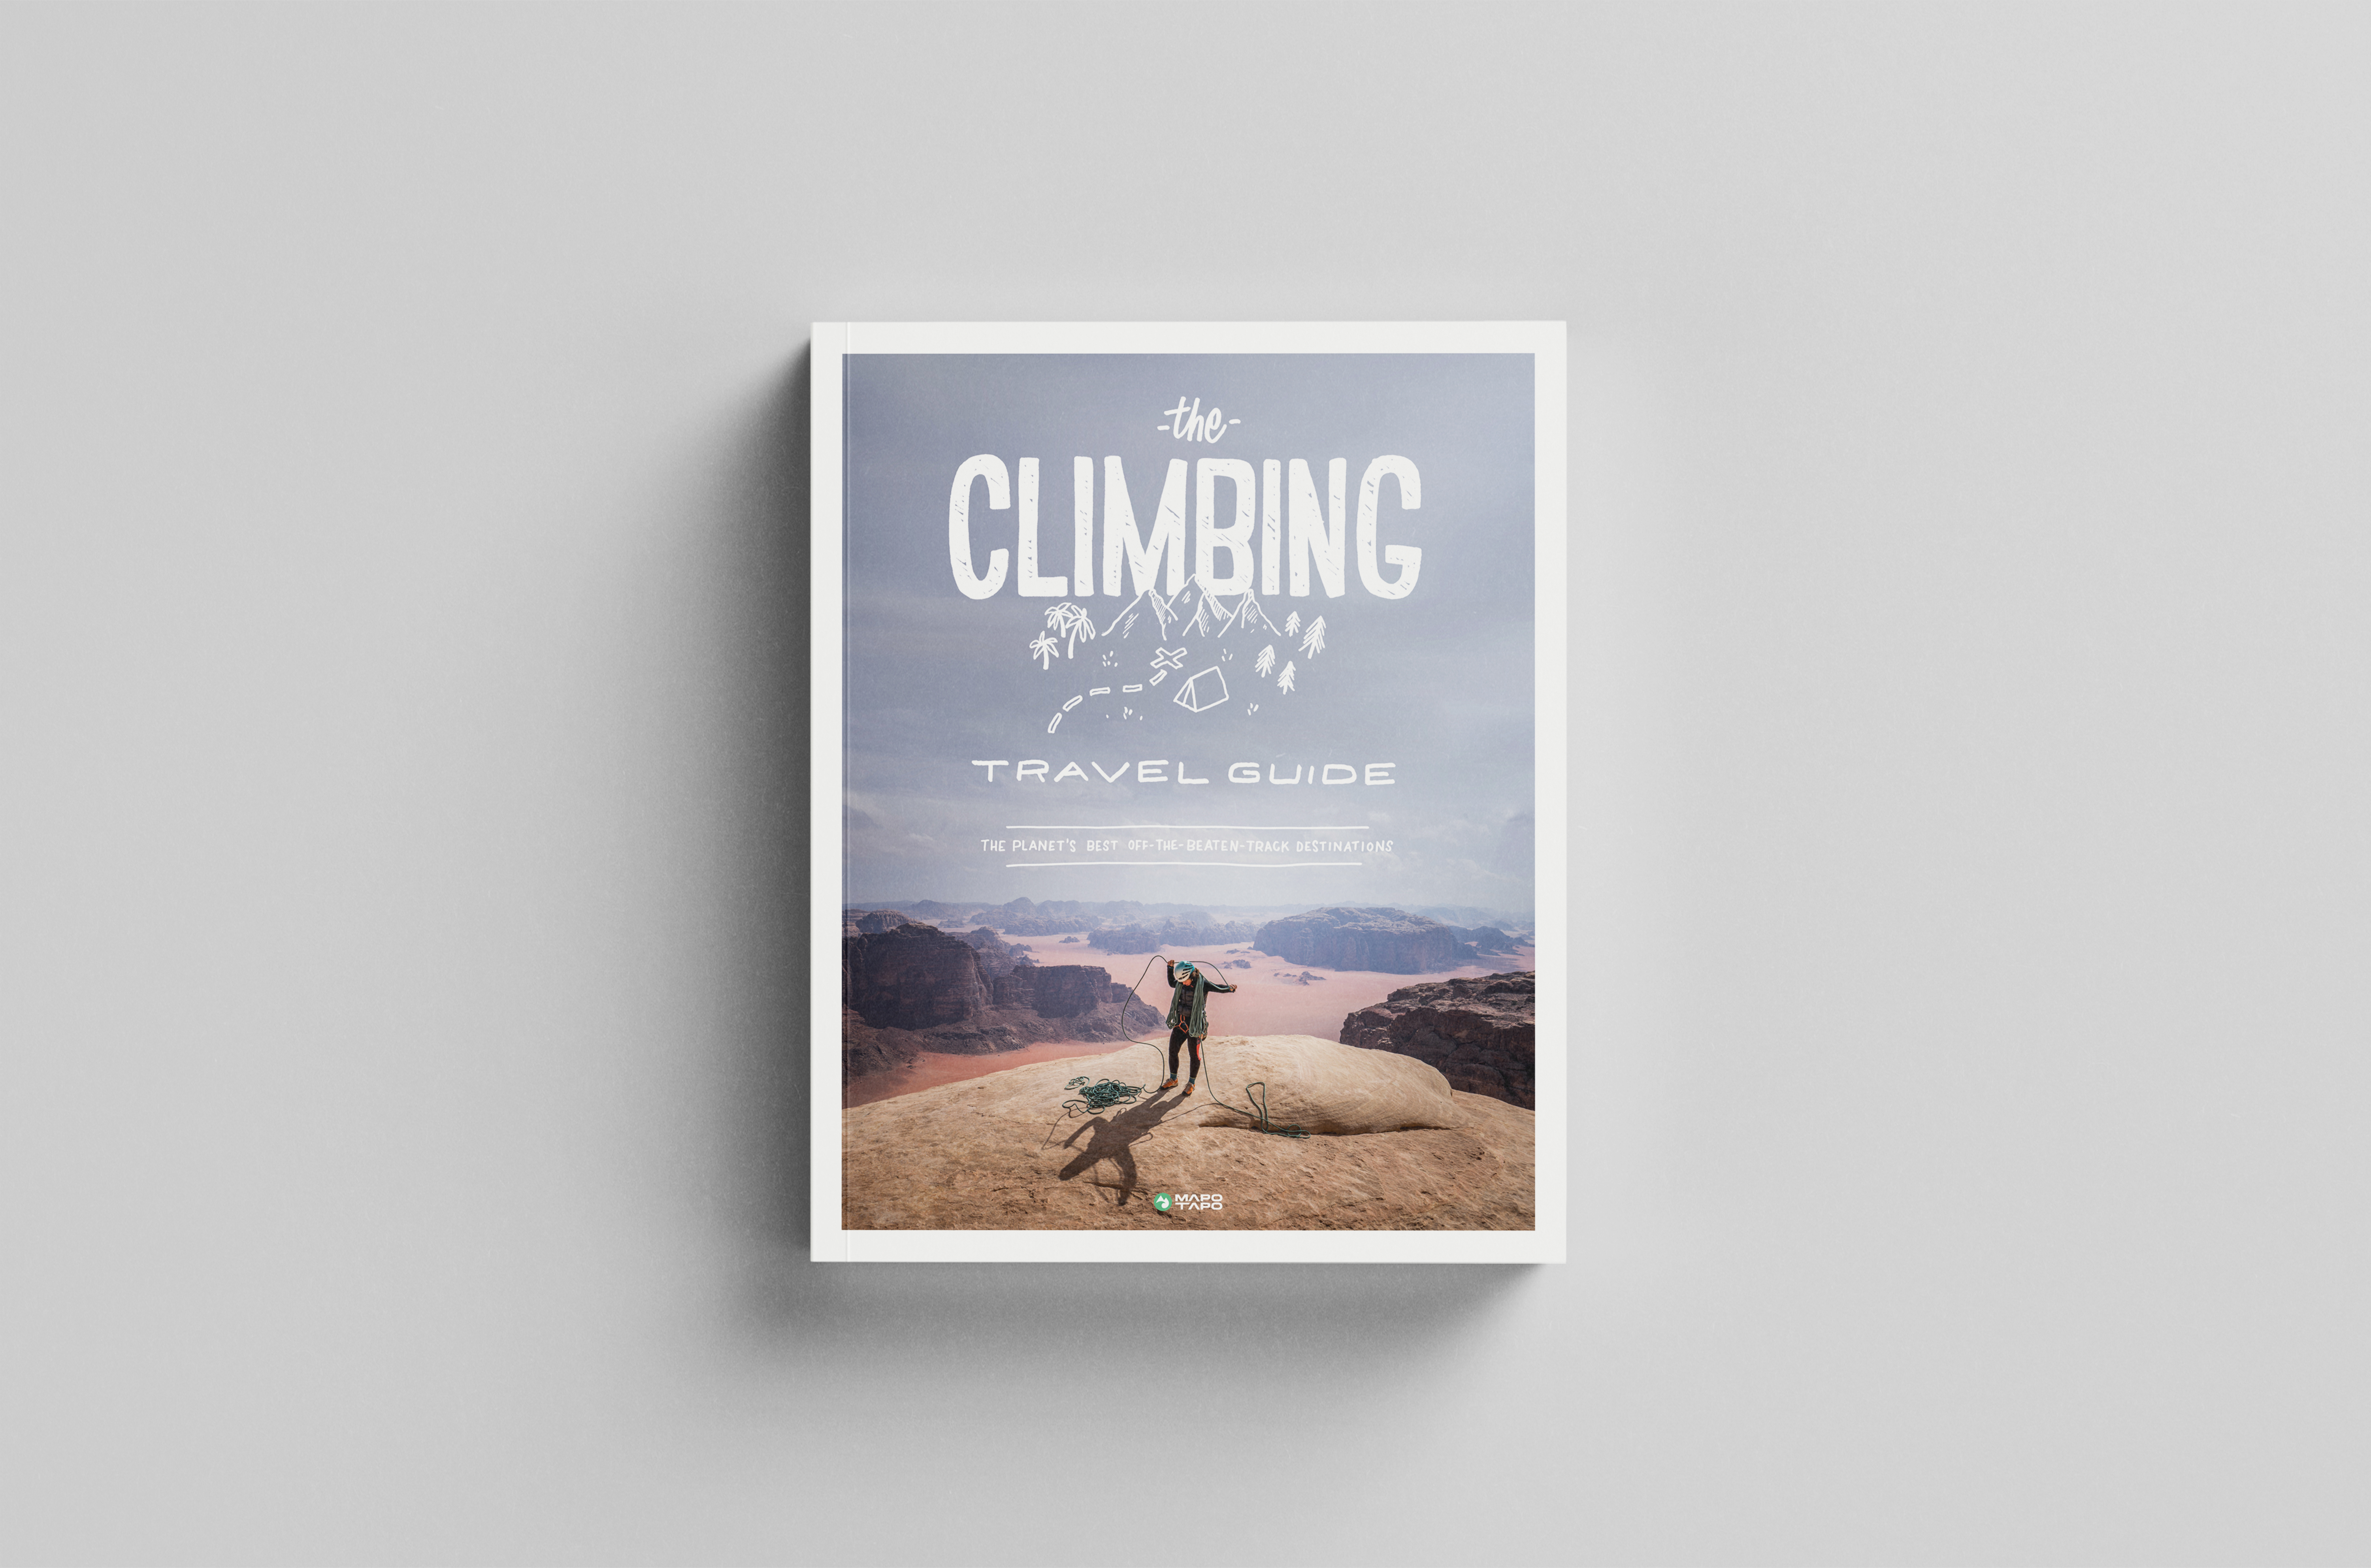 An image of the cover of the Climbing Travel Guide